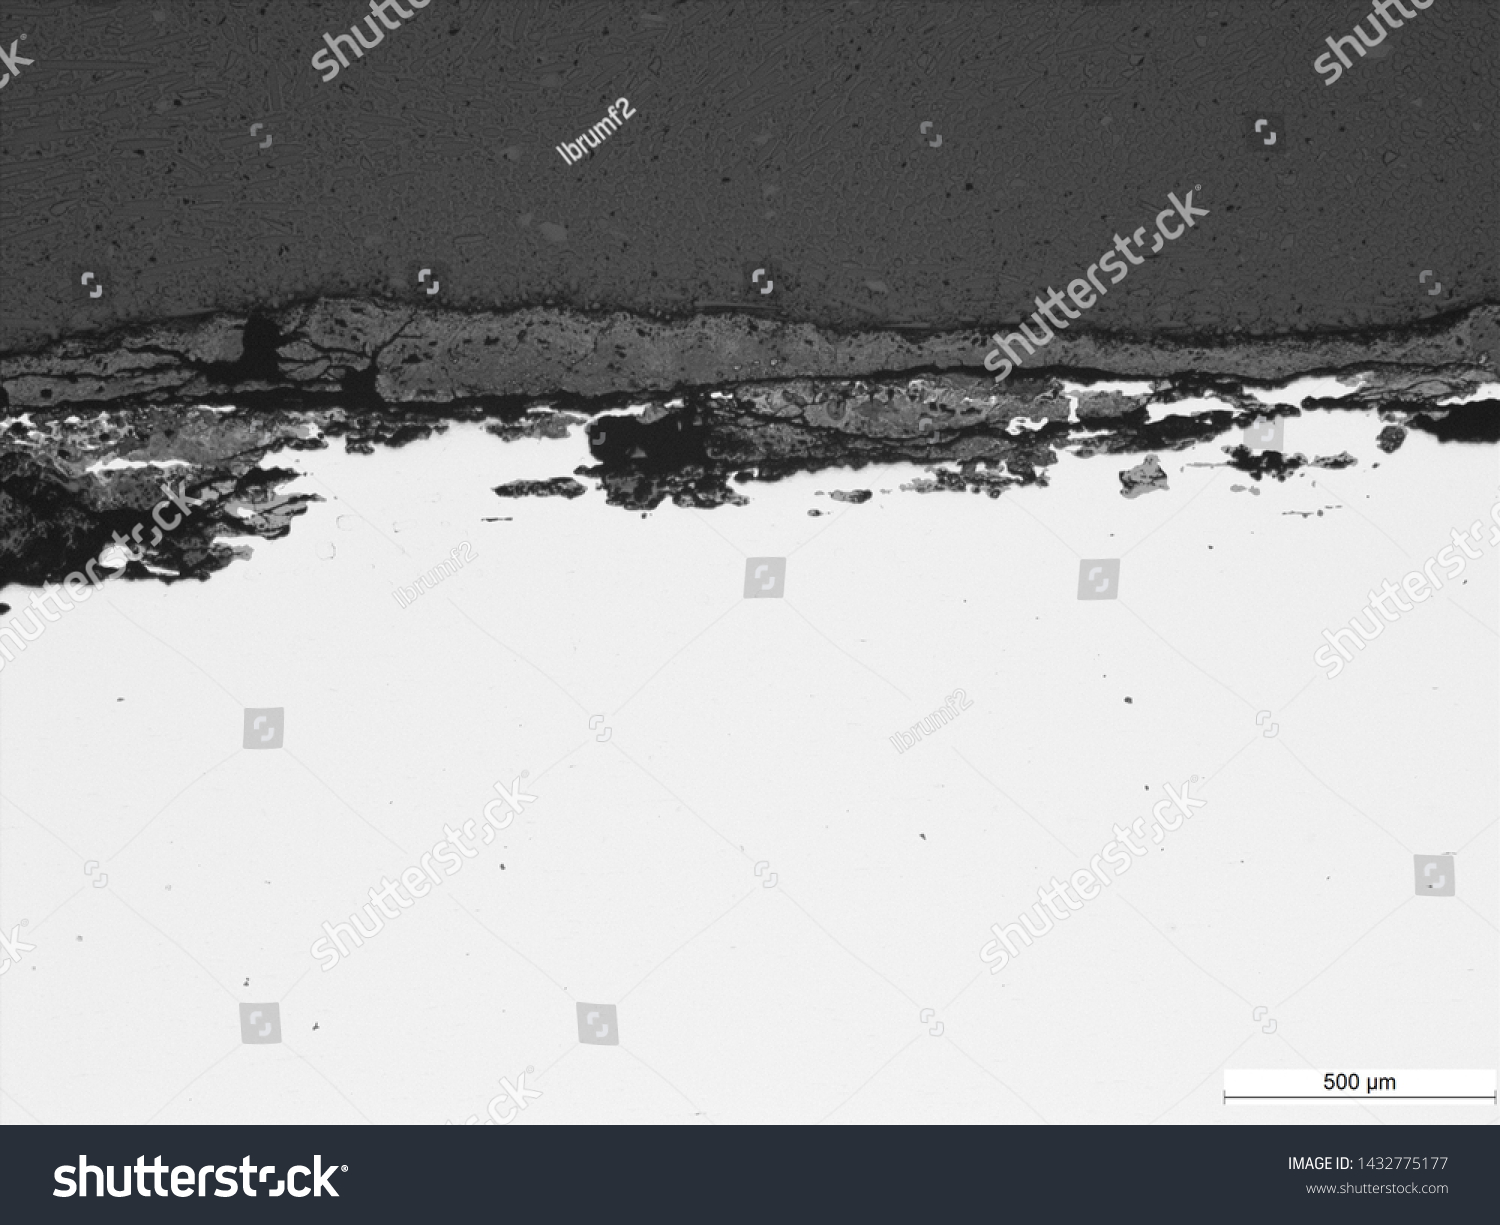 Corrosion and cracking of 2" carbon steel tubing, likely cause is stress corrosion cracking, micrographs #1432775177